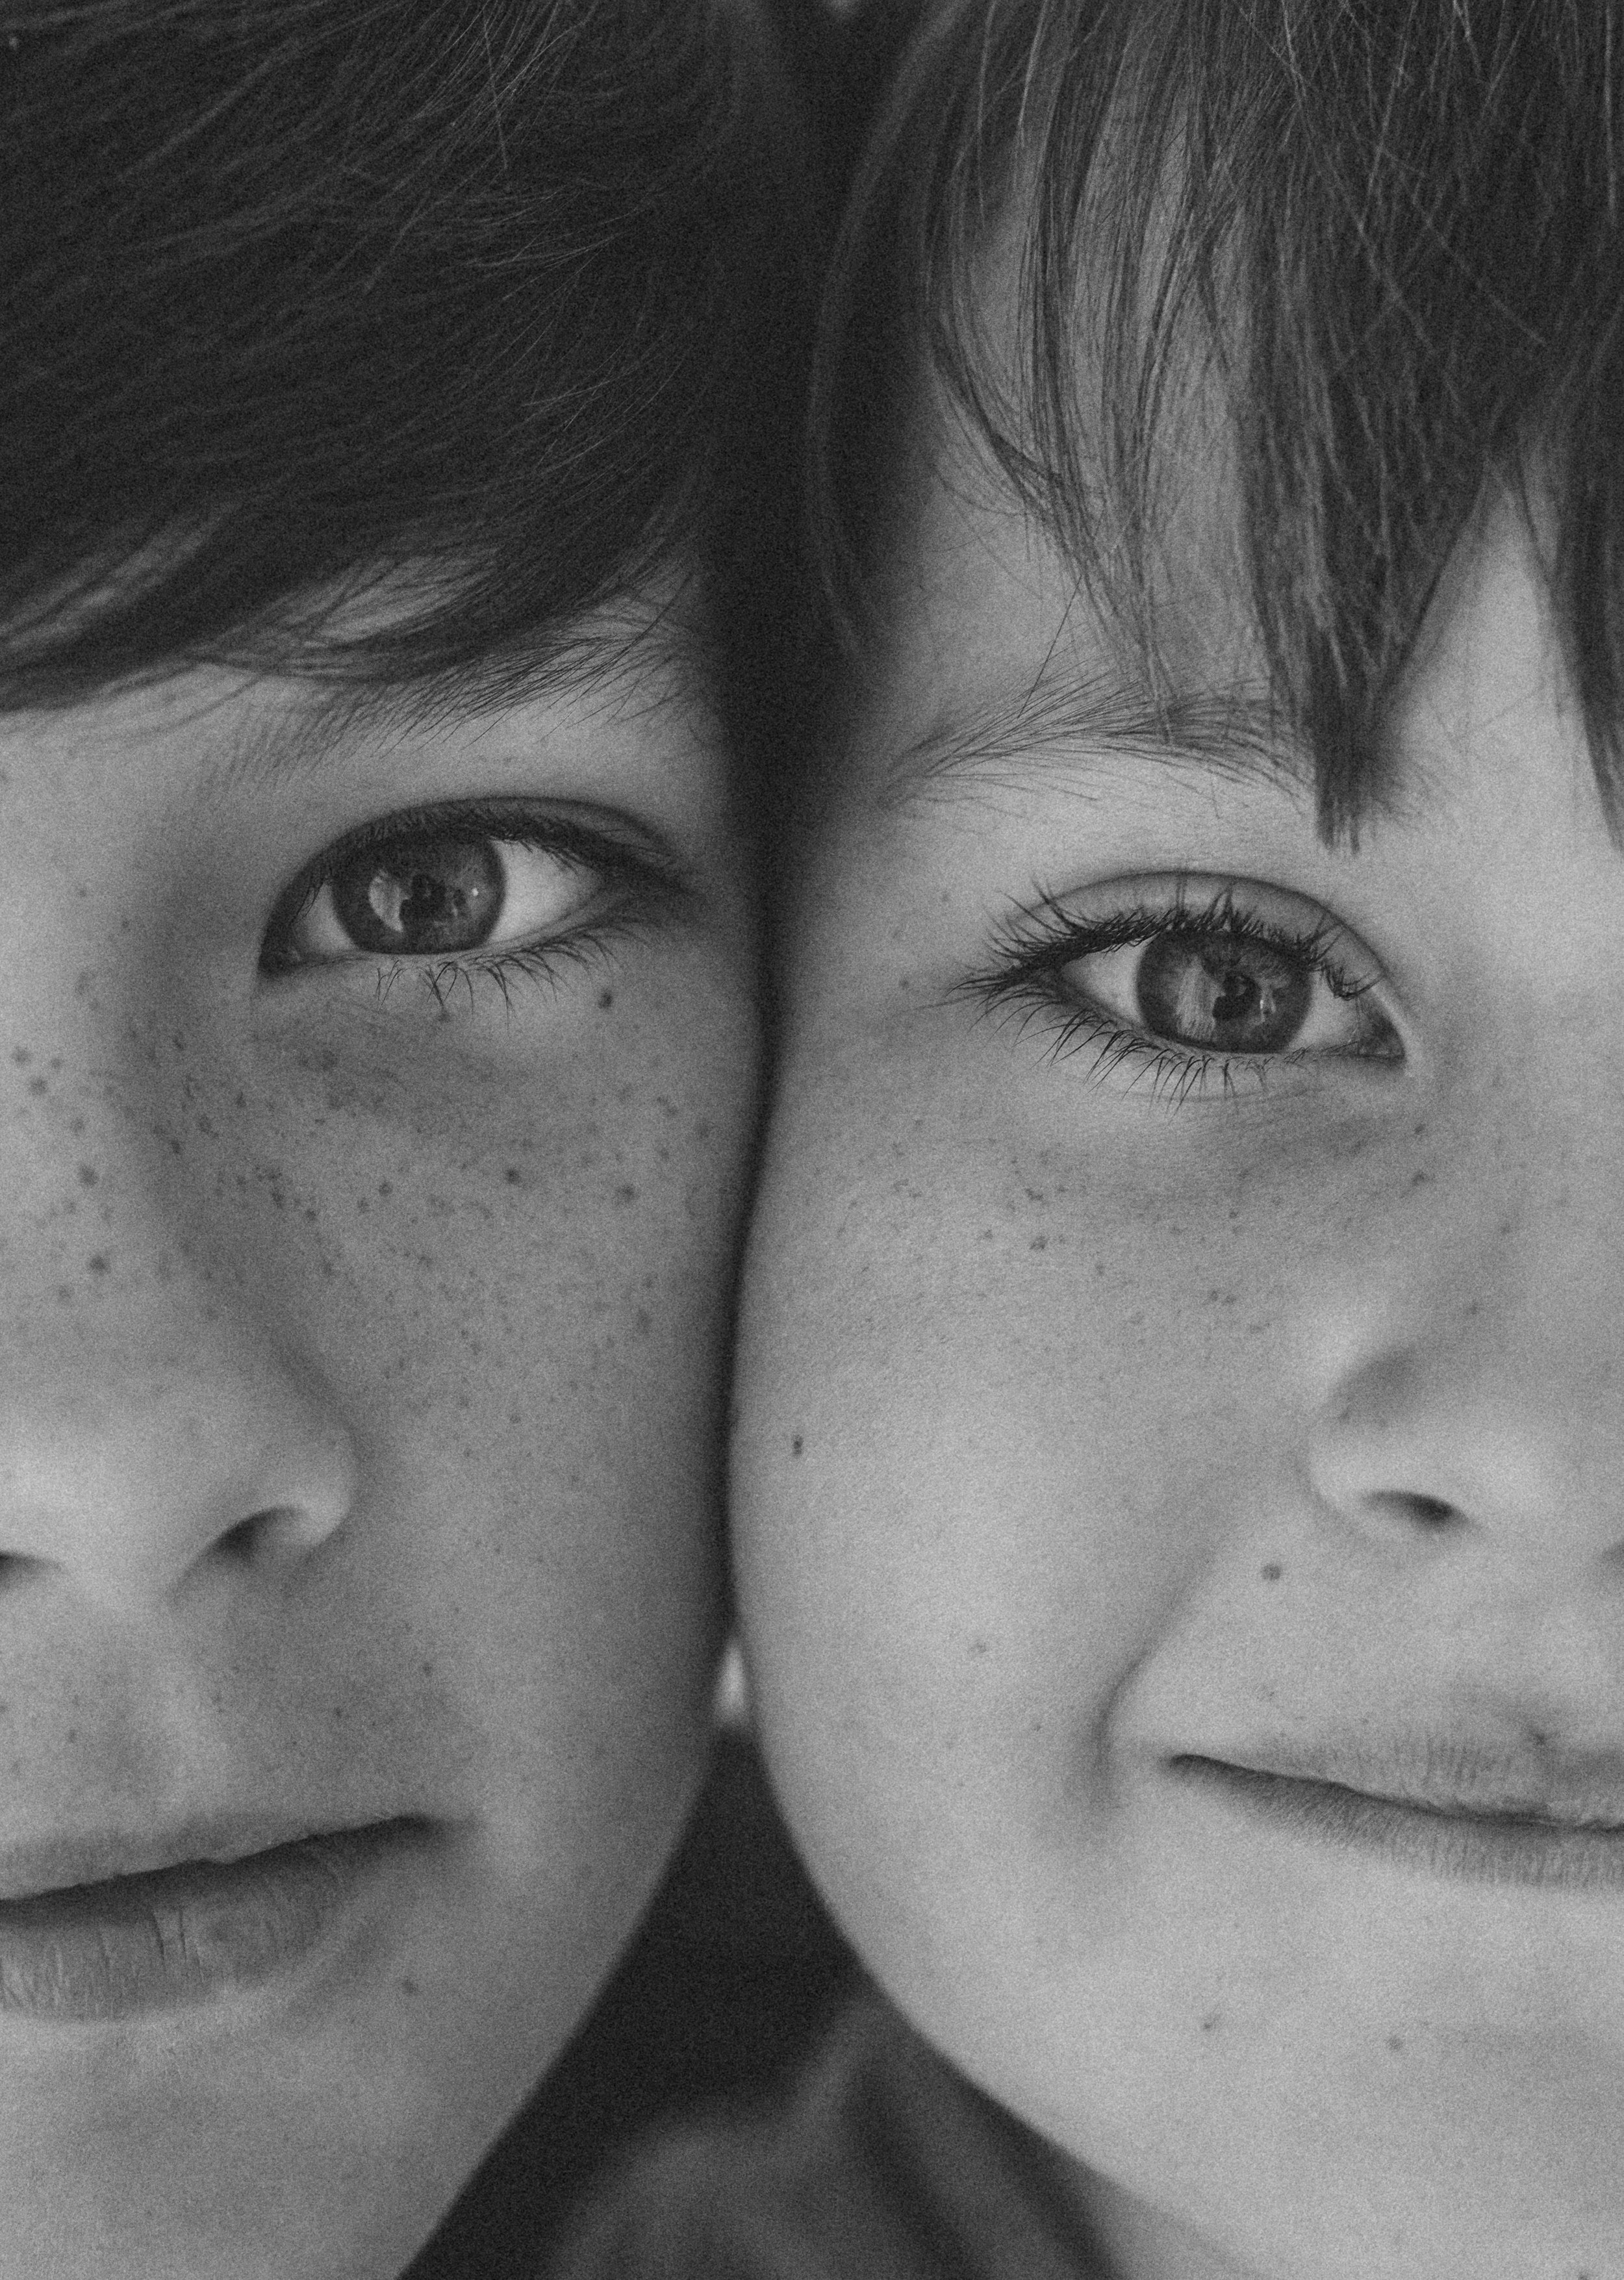 two brothers eye to eye, close up photograph in black and white